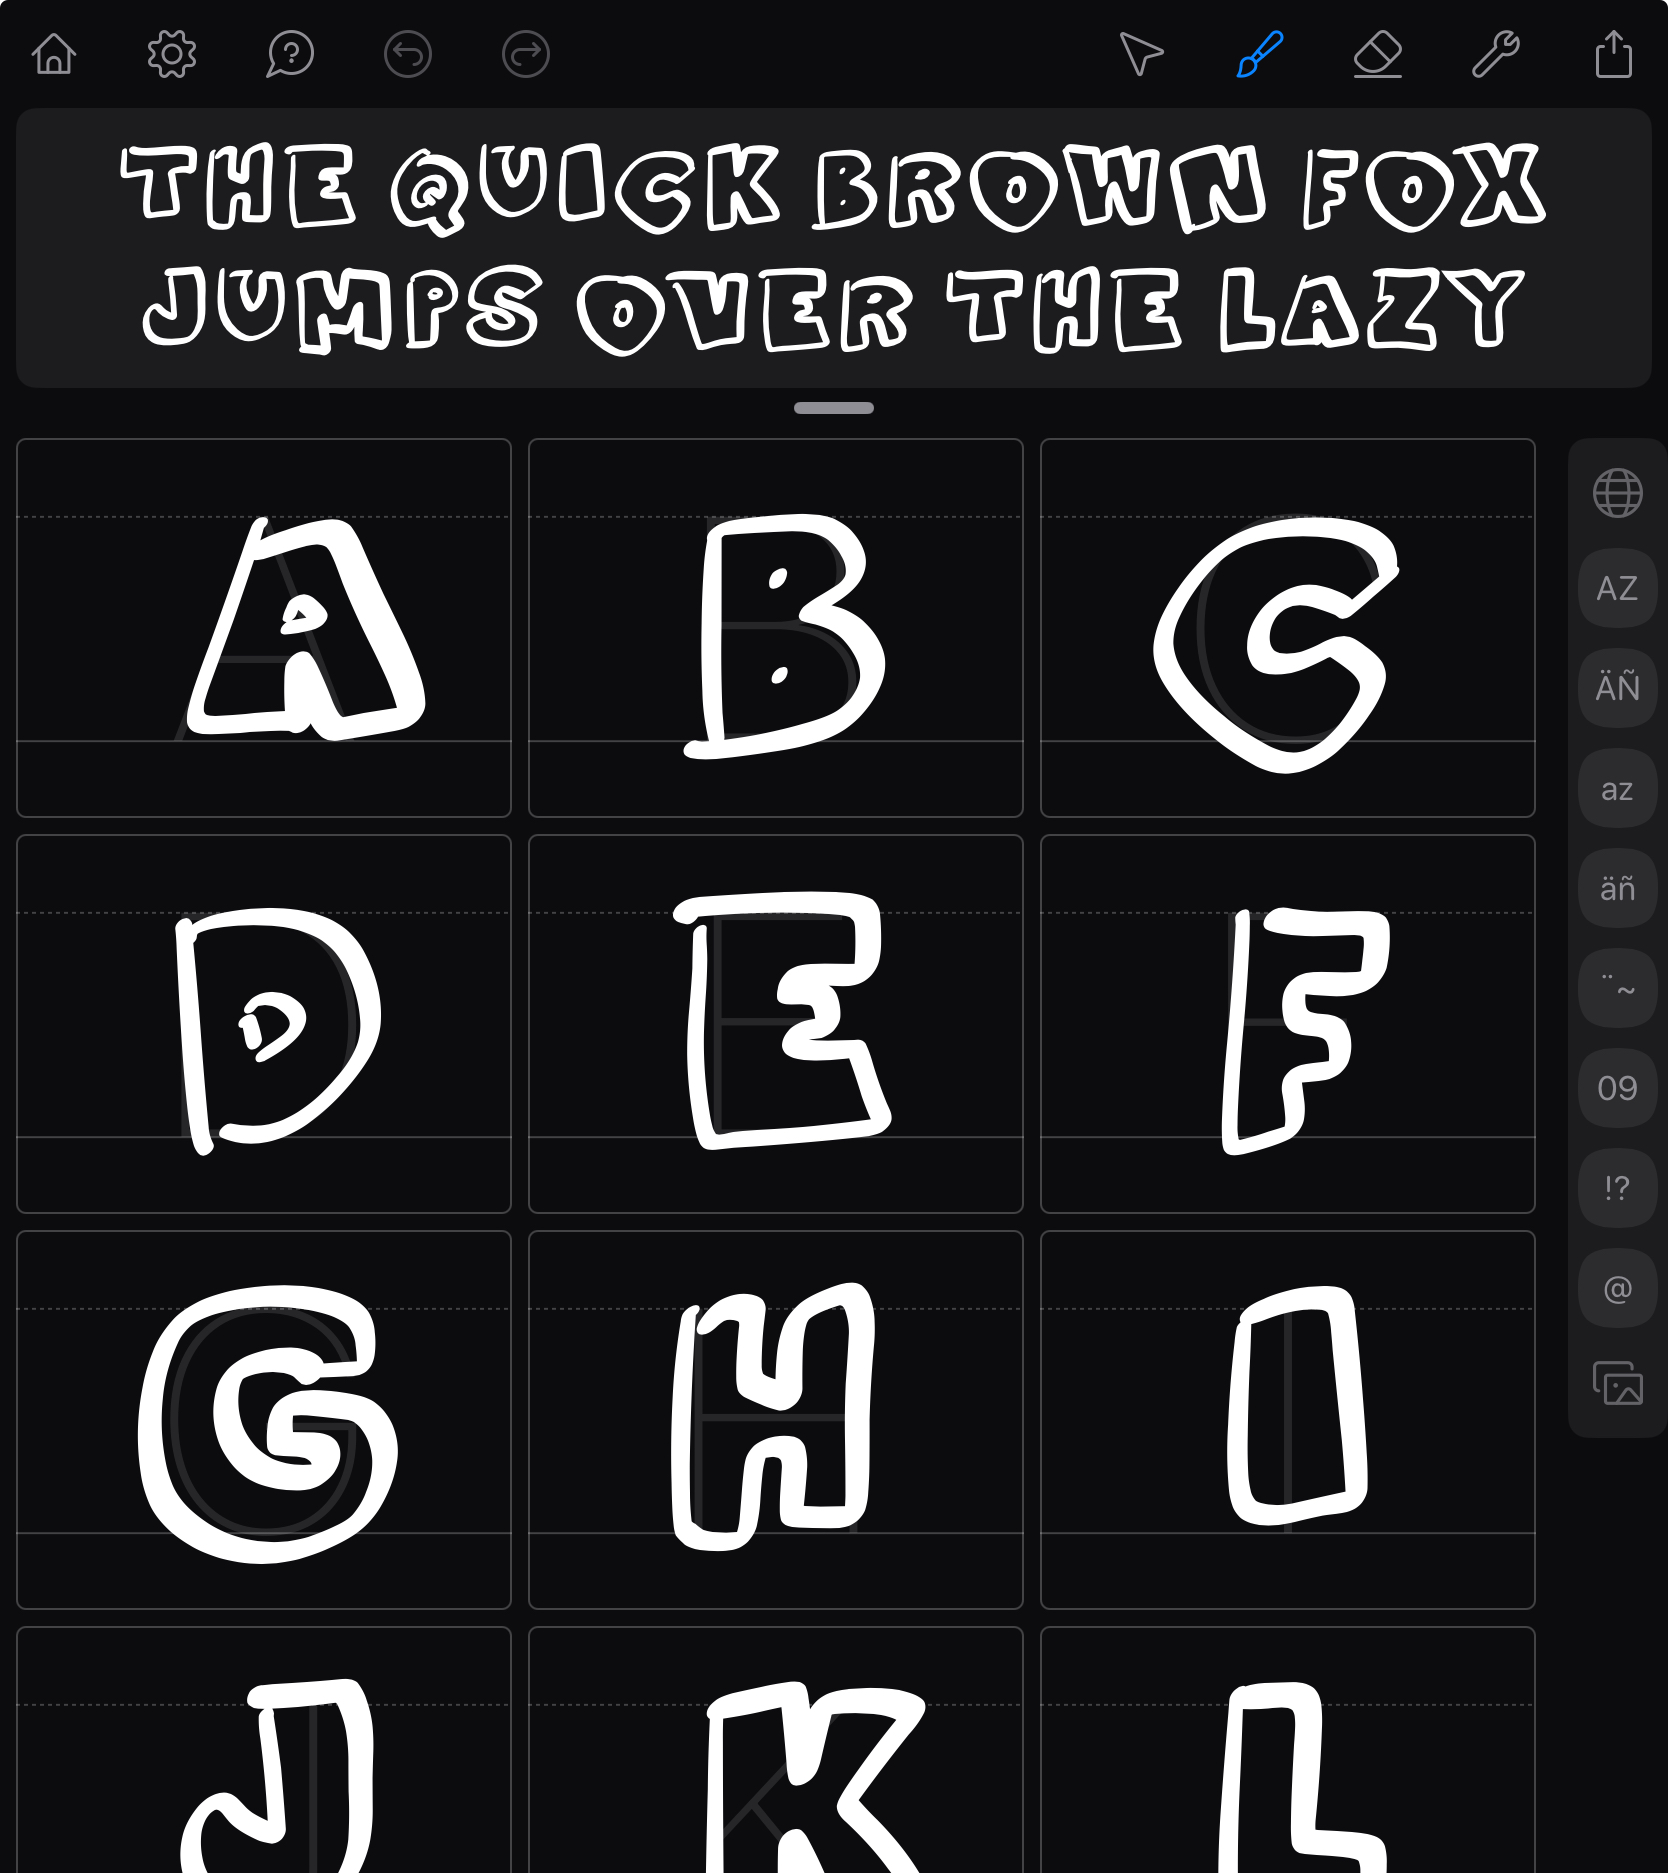 Digital display of handwritten alphabet characters A to K on a dark background with the phrase THE QUICK BROWN FOX JUMPS OVER THE LAZY at the top.